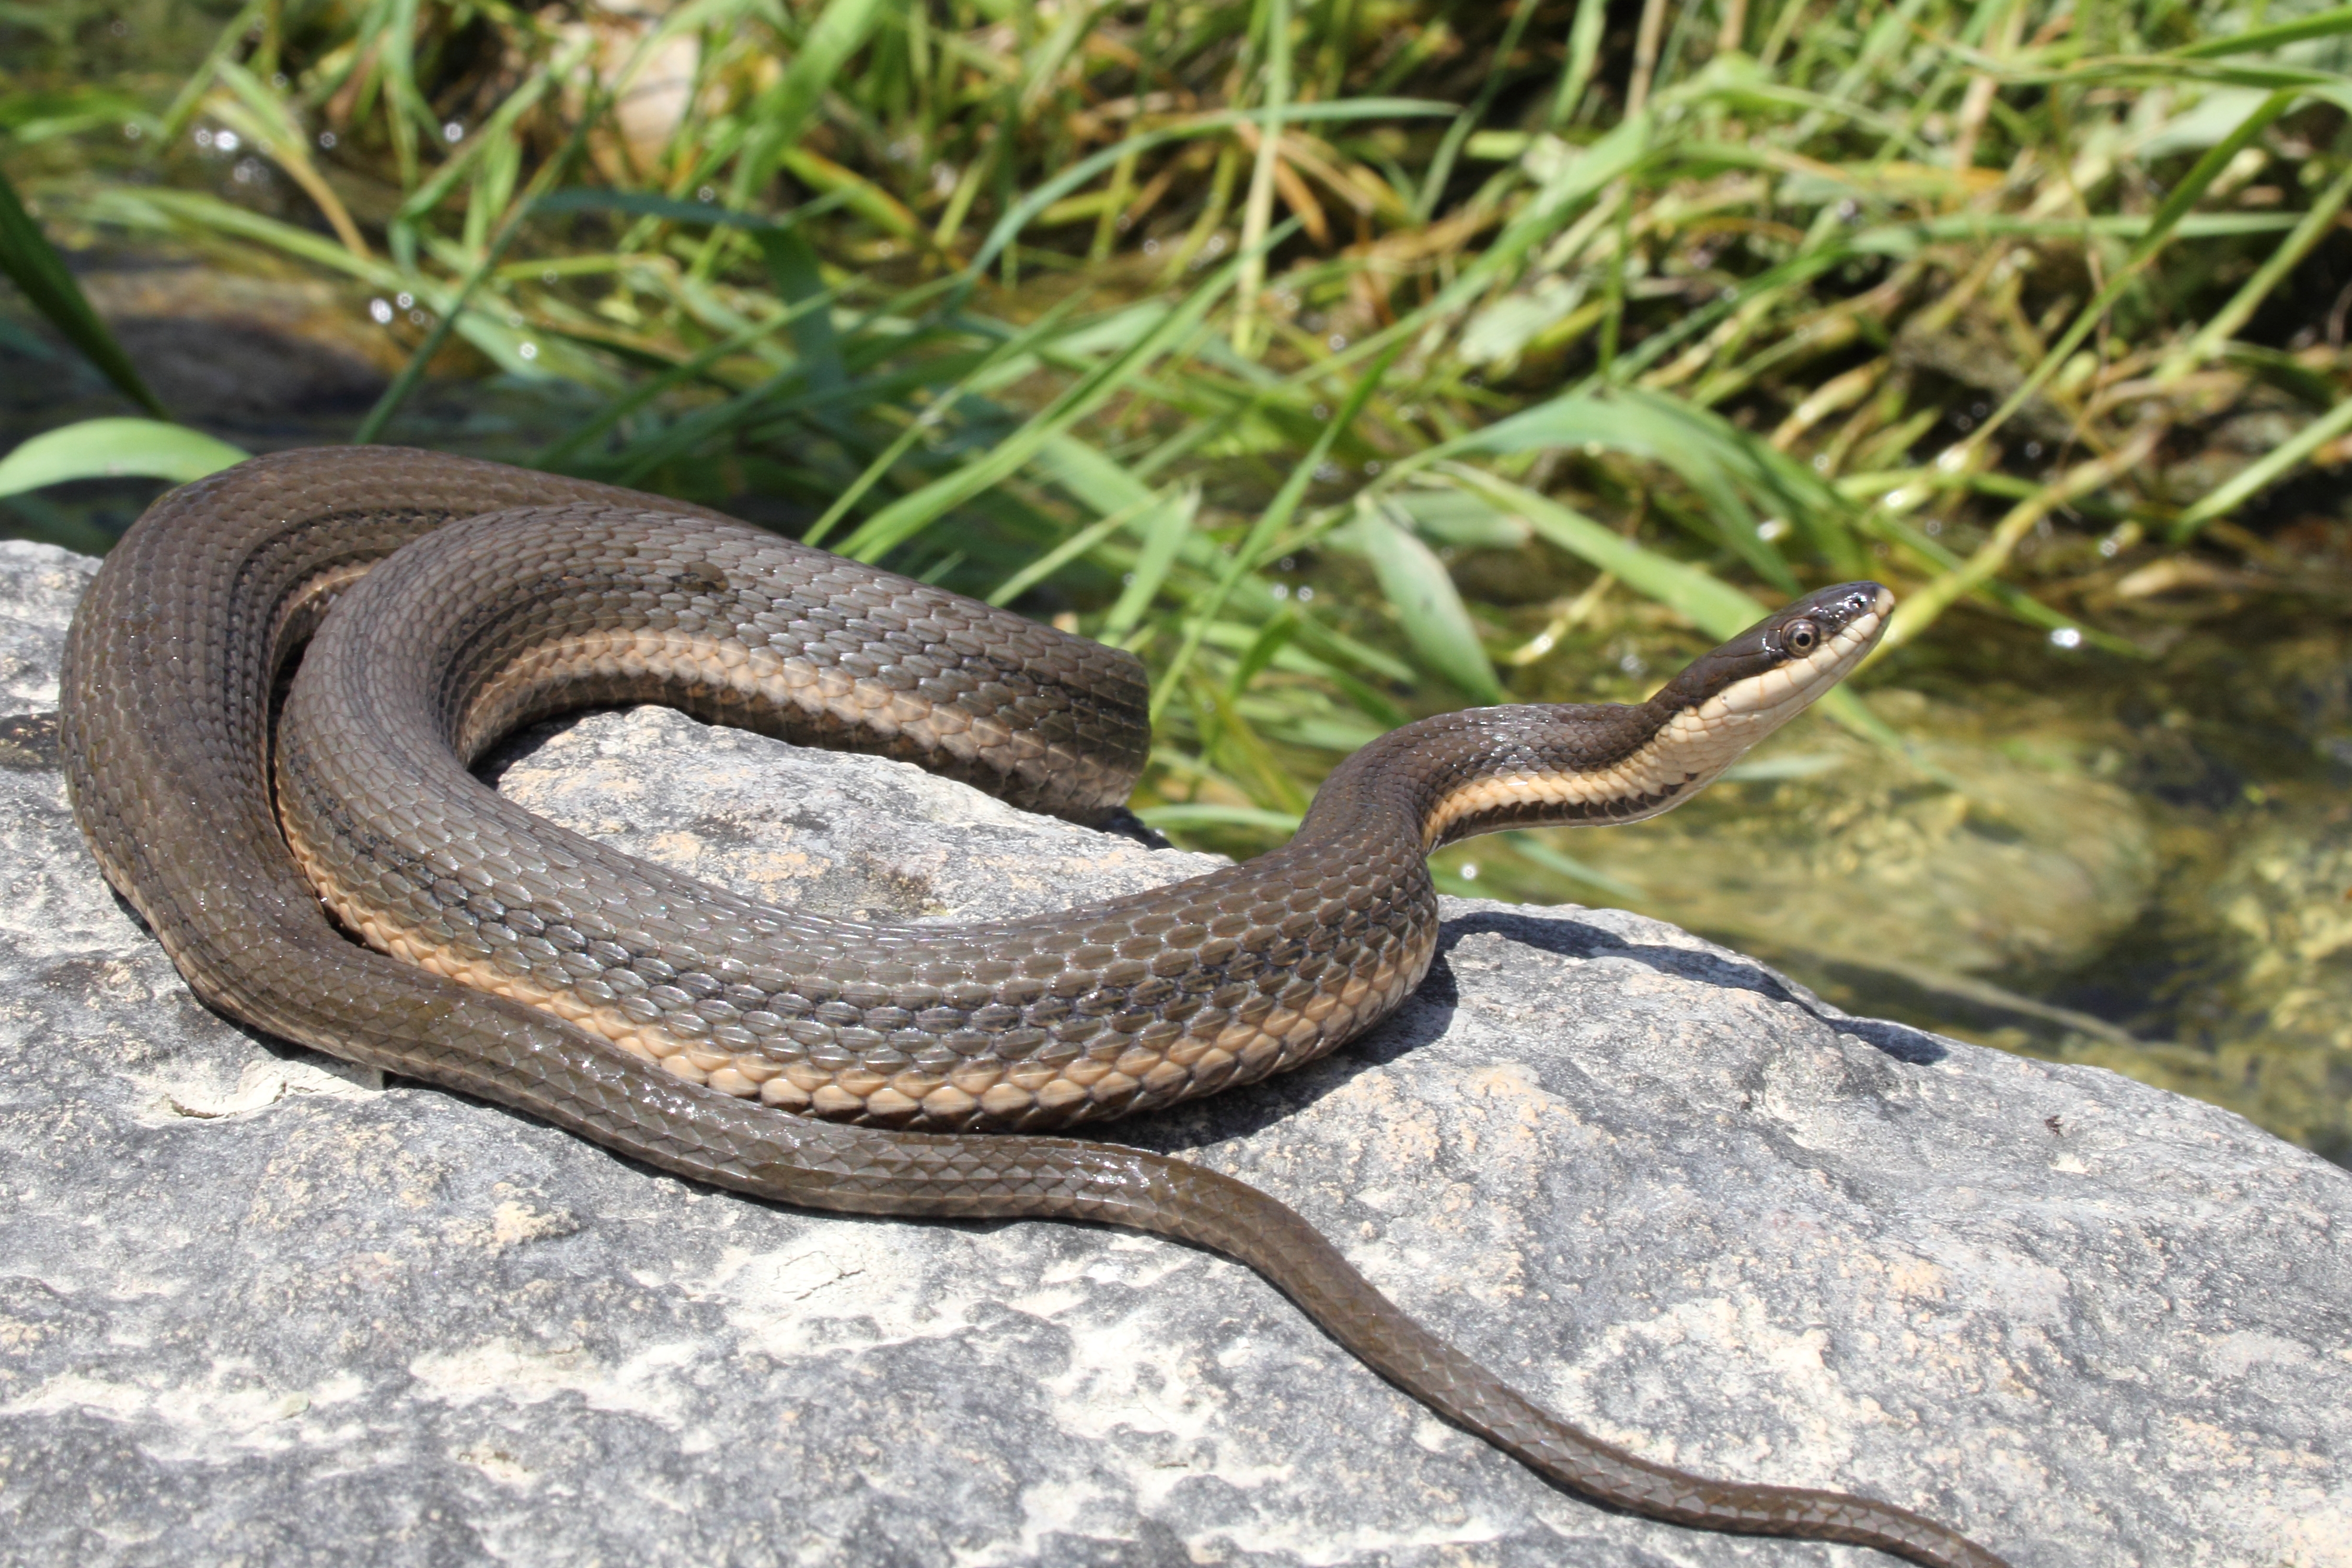 Queensnake | Five-year review of progress towards the protection and  recovery of Ontario's species at risk - 2016 | ontario.ca